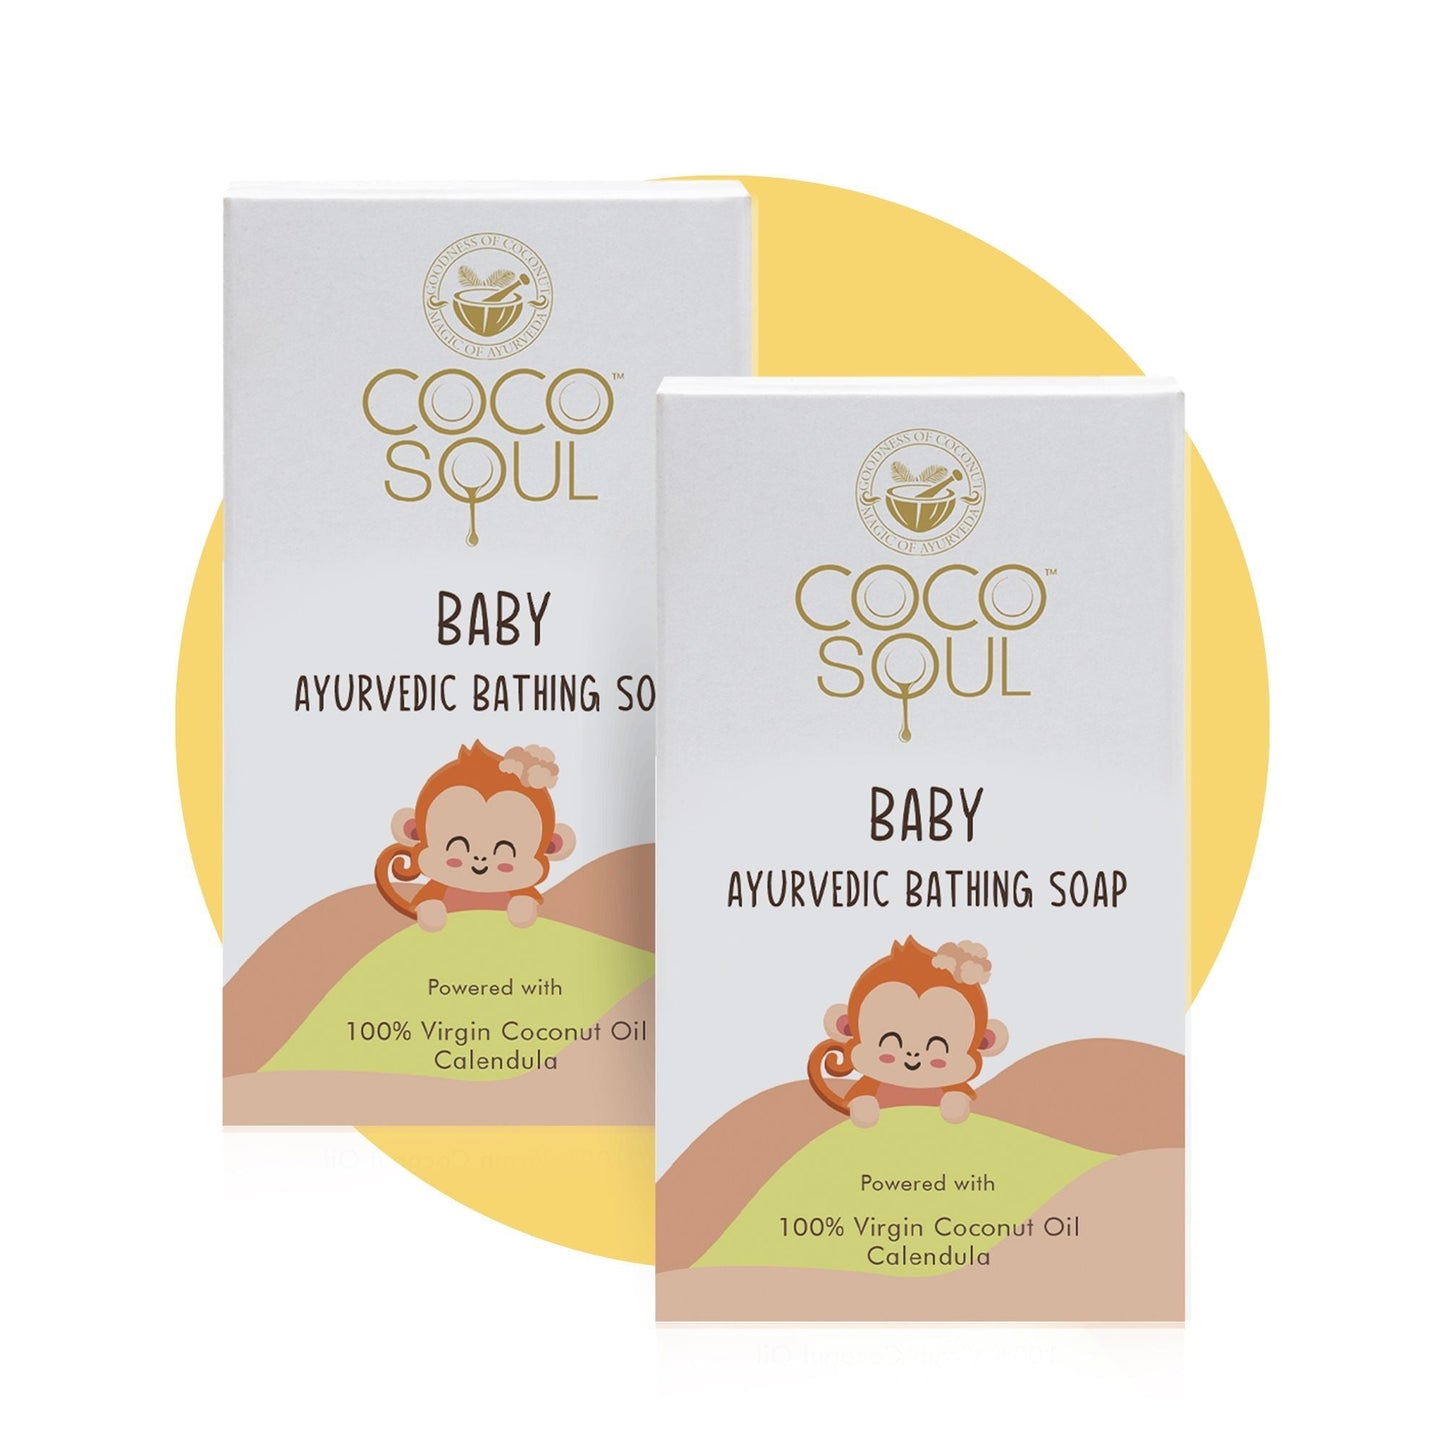 Baby Ayurvedic Bathing Soap 75 gm  From the makers of Parachute Advansed  150gm Pack of 2